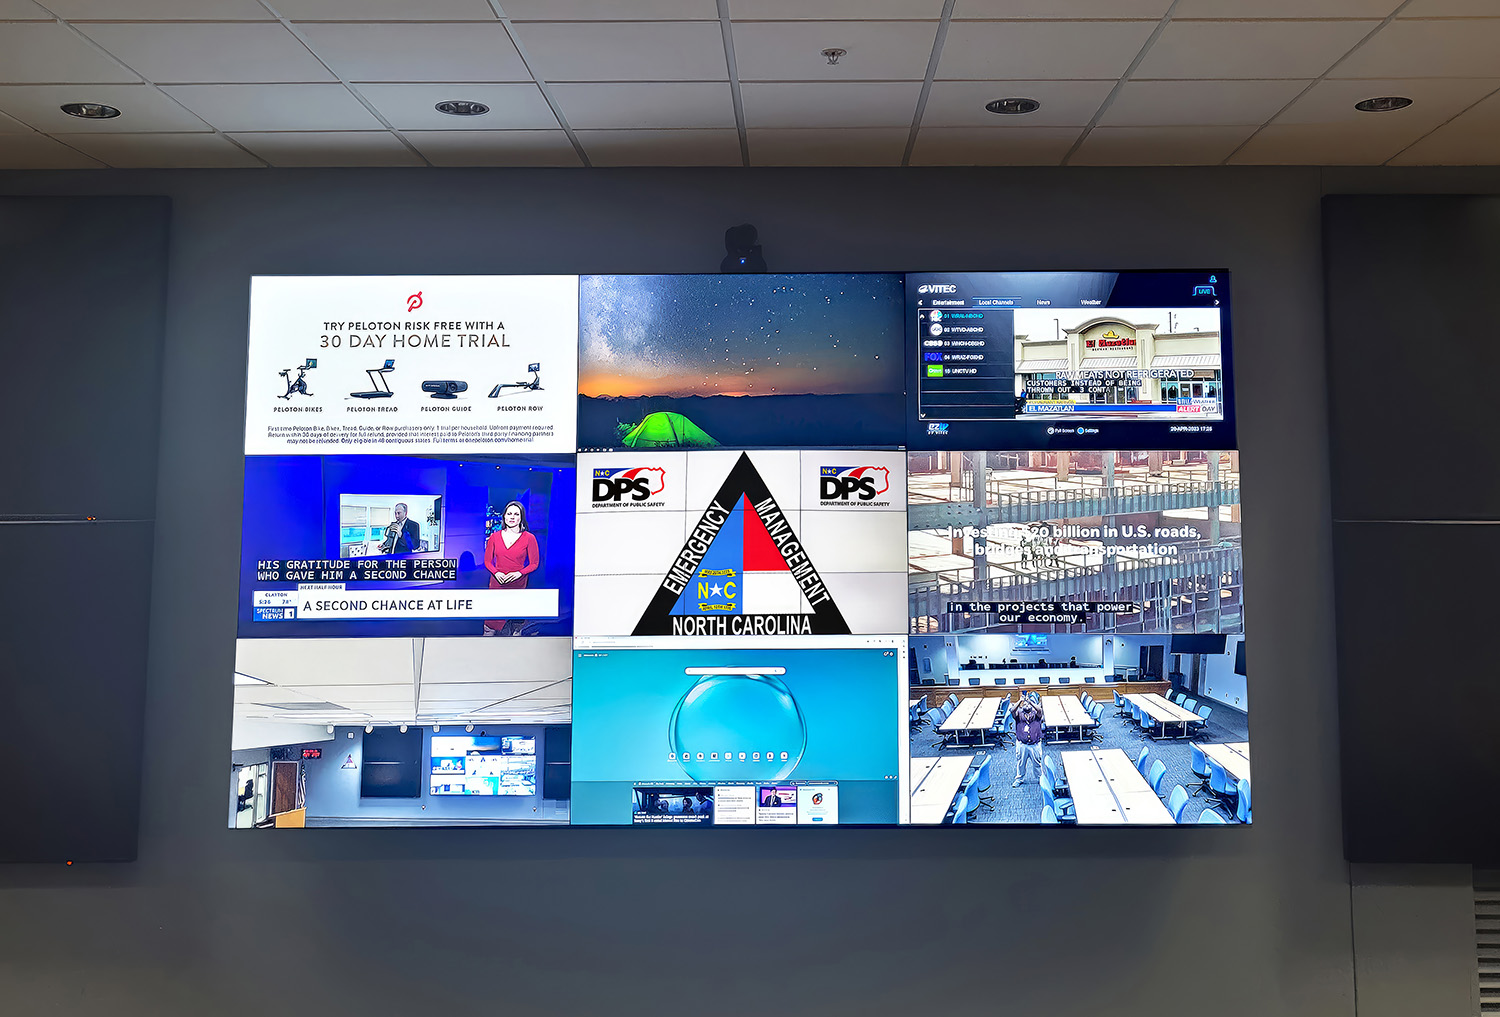 Thumbnail - The North Carolina state officials immediately recognized the enhancements that enable easy, seamless content display within the Situation Room and throughout the EOC.